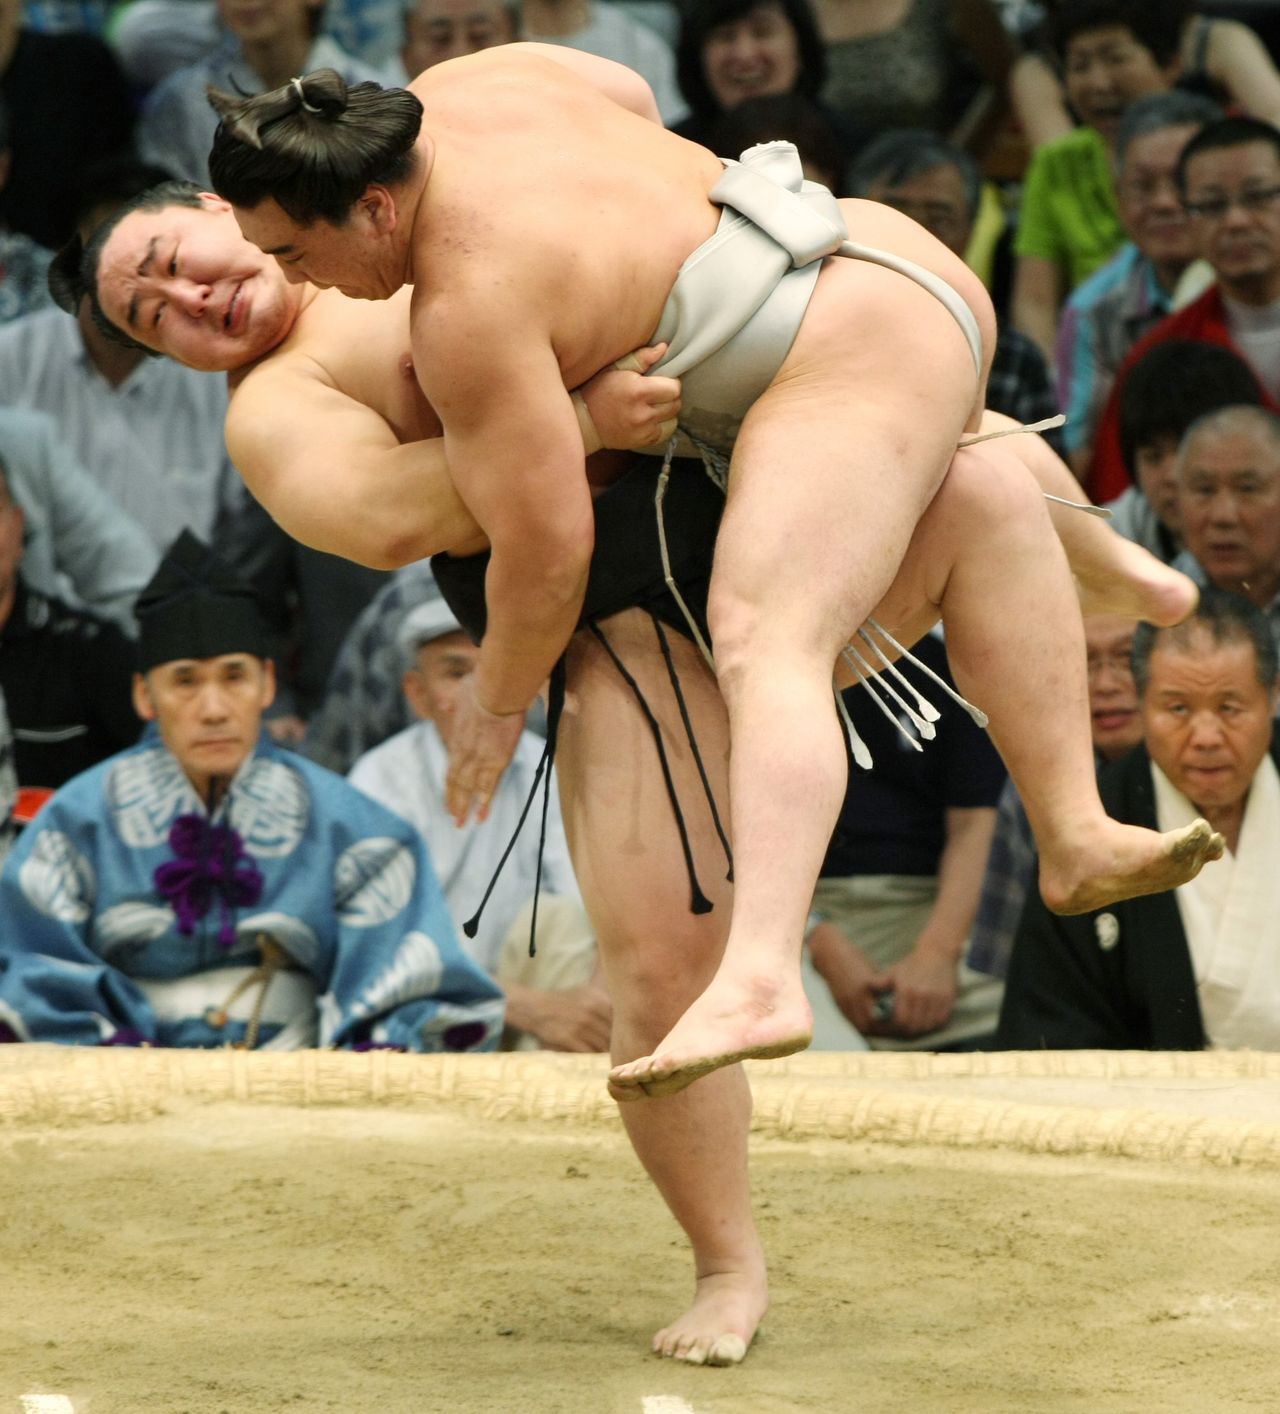 At the July 2009 basho, Mongolia-born Asashōryū (left) lifts Harumafuji atop his leg and, using a left upper arm throw, pulls off a yaguranage. Interviewed after the match, Asashōryū said that the move was the same as one used in Mongolian wrestling, and that he had been planning for a while to use it. (© Jiji)